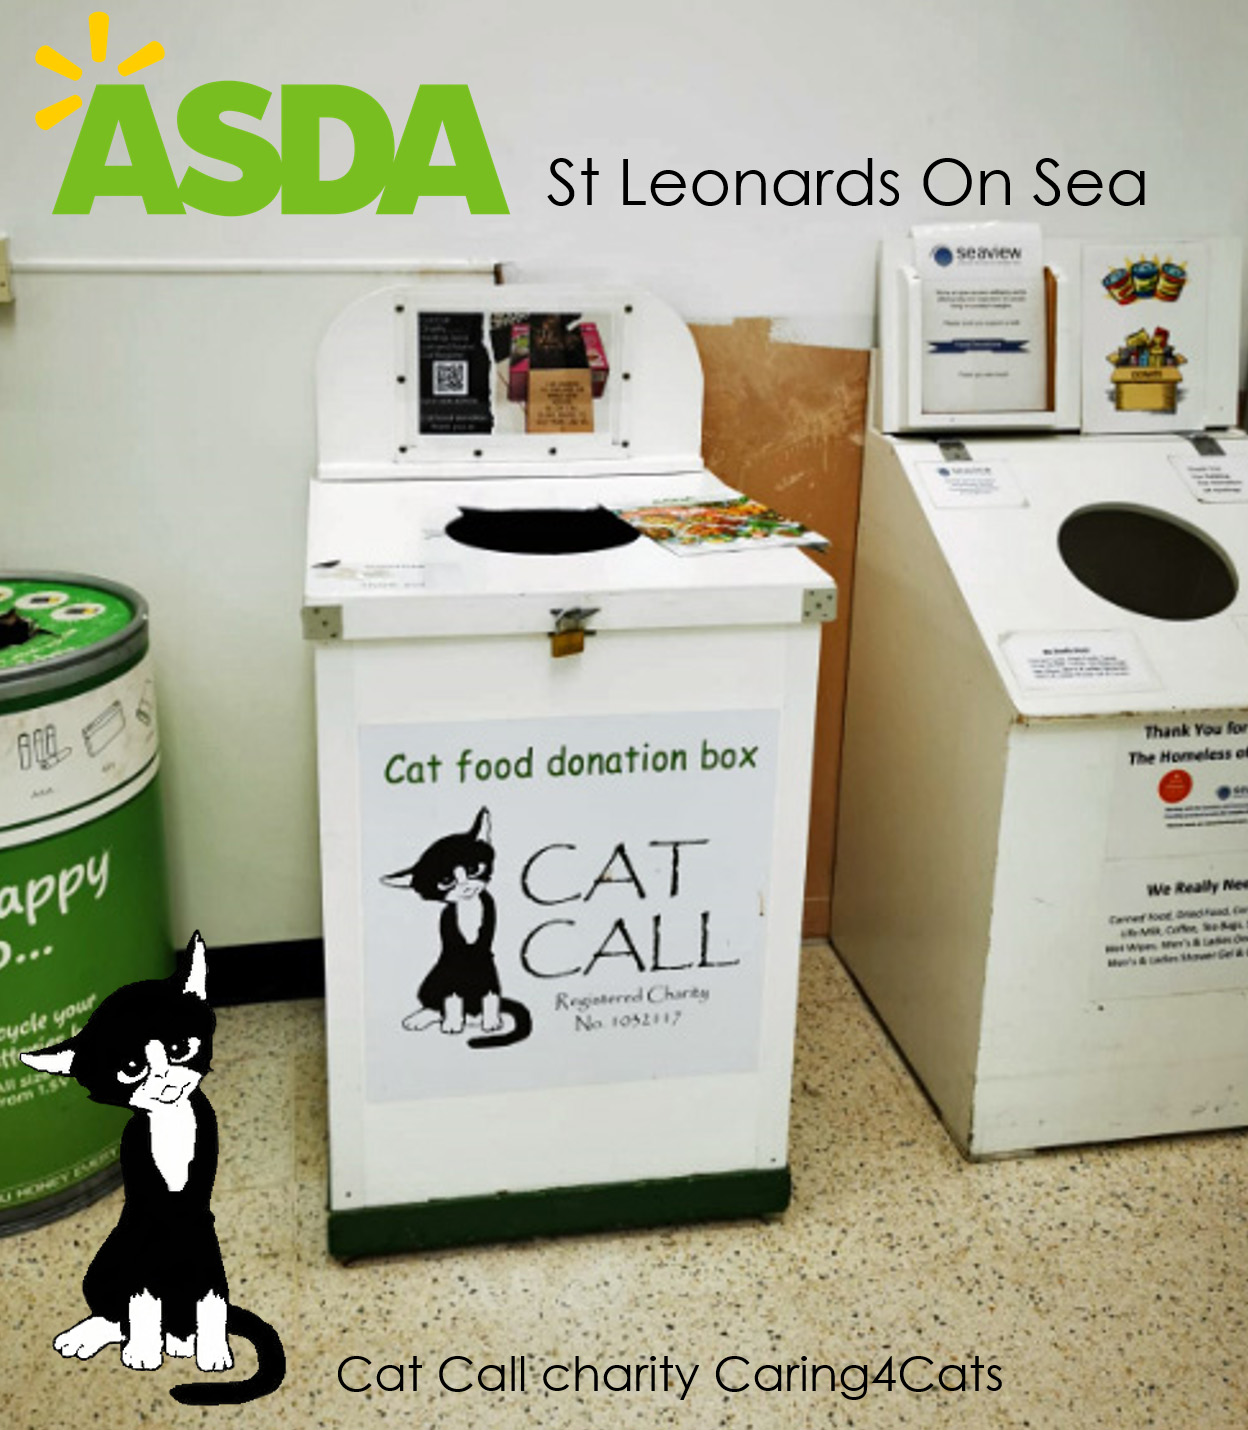 Update – Our Cat Call food donation box in Asda